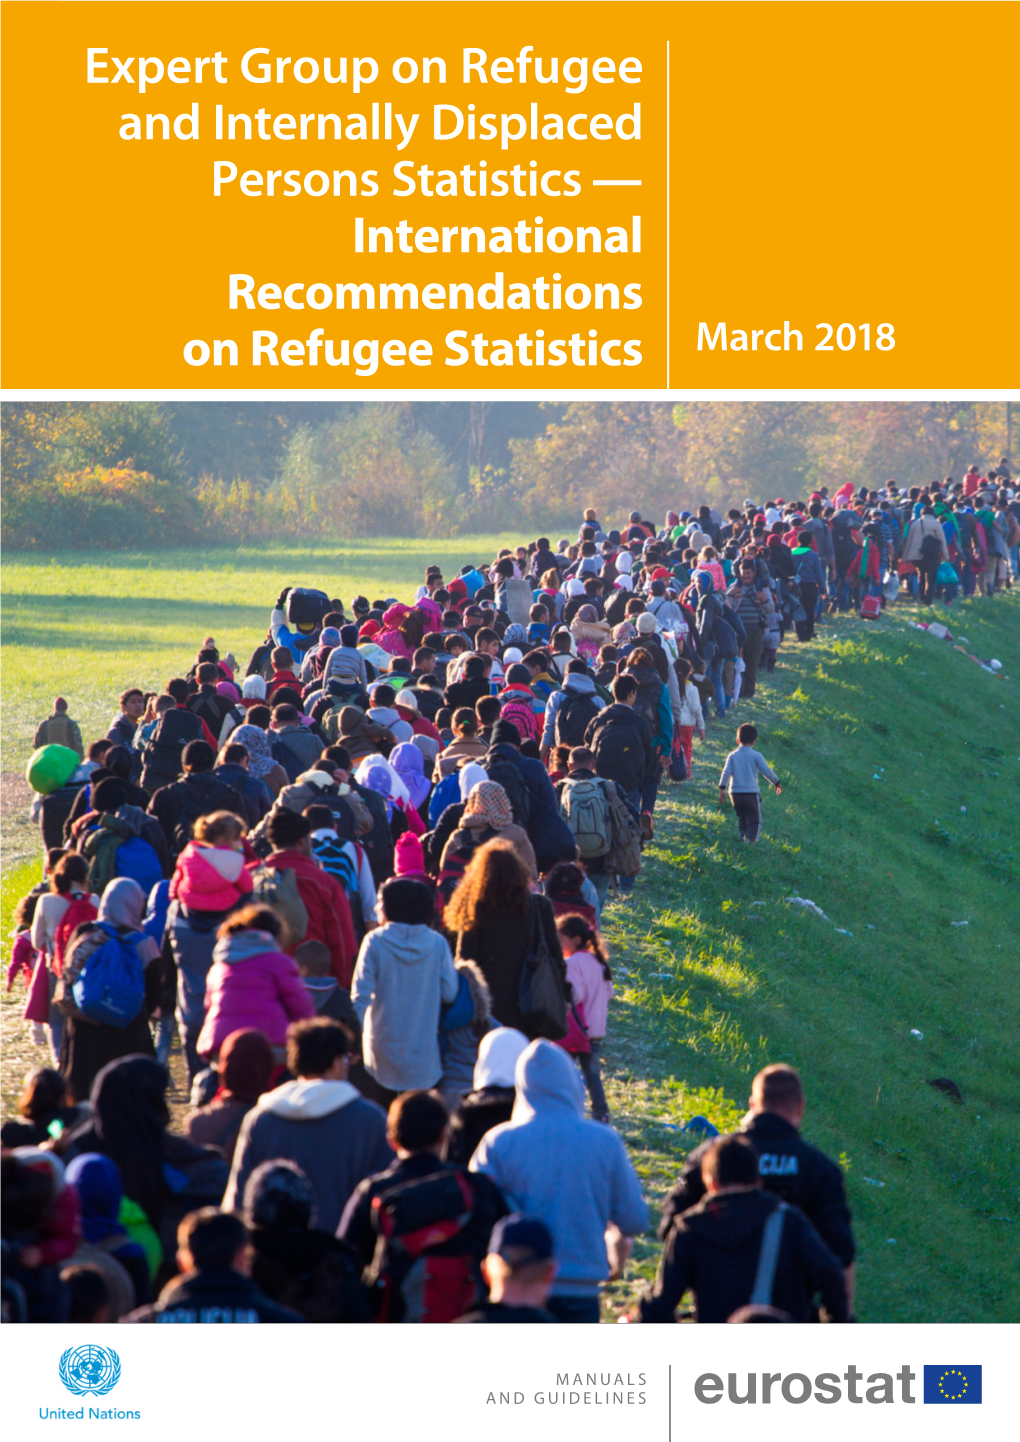 Expert Group on Refugee and Internally Displaced Persons Statistics